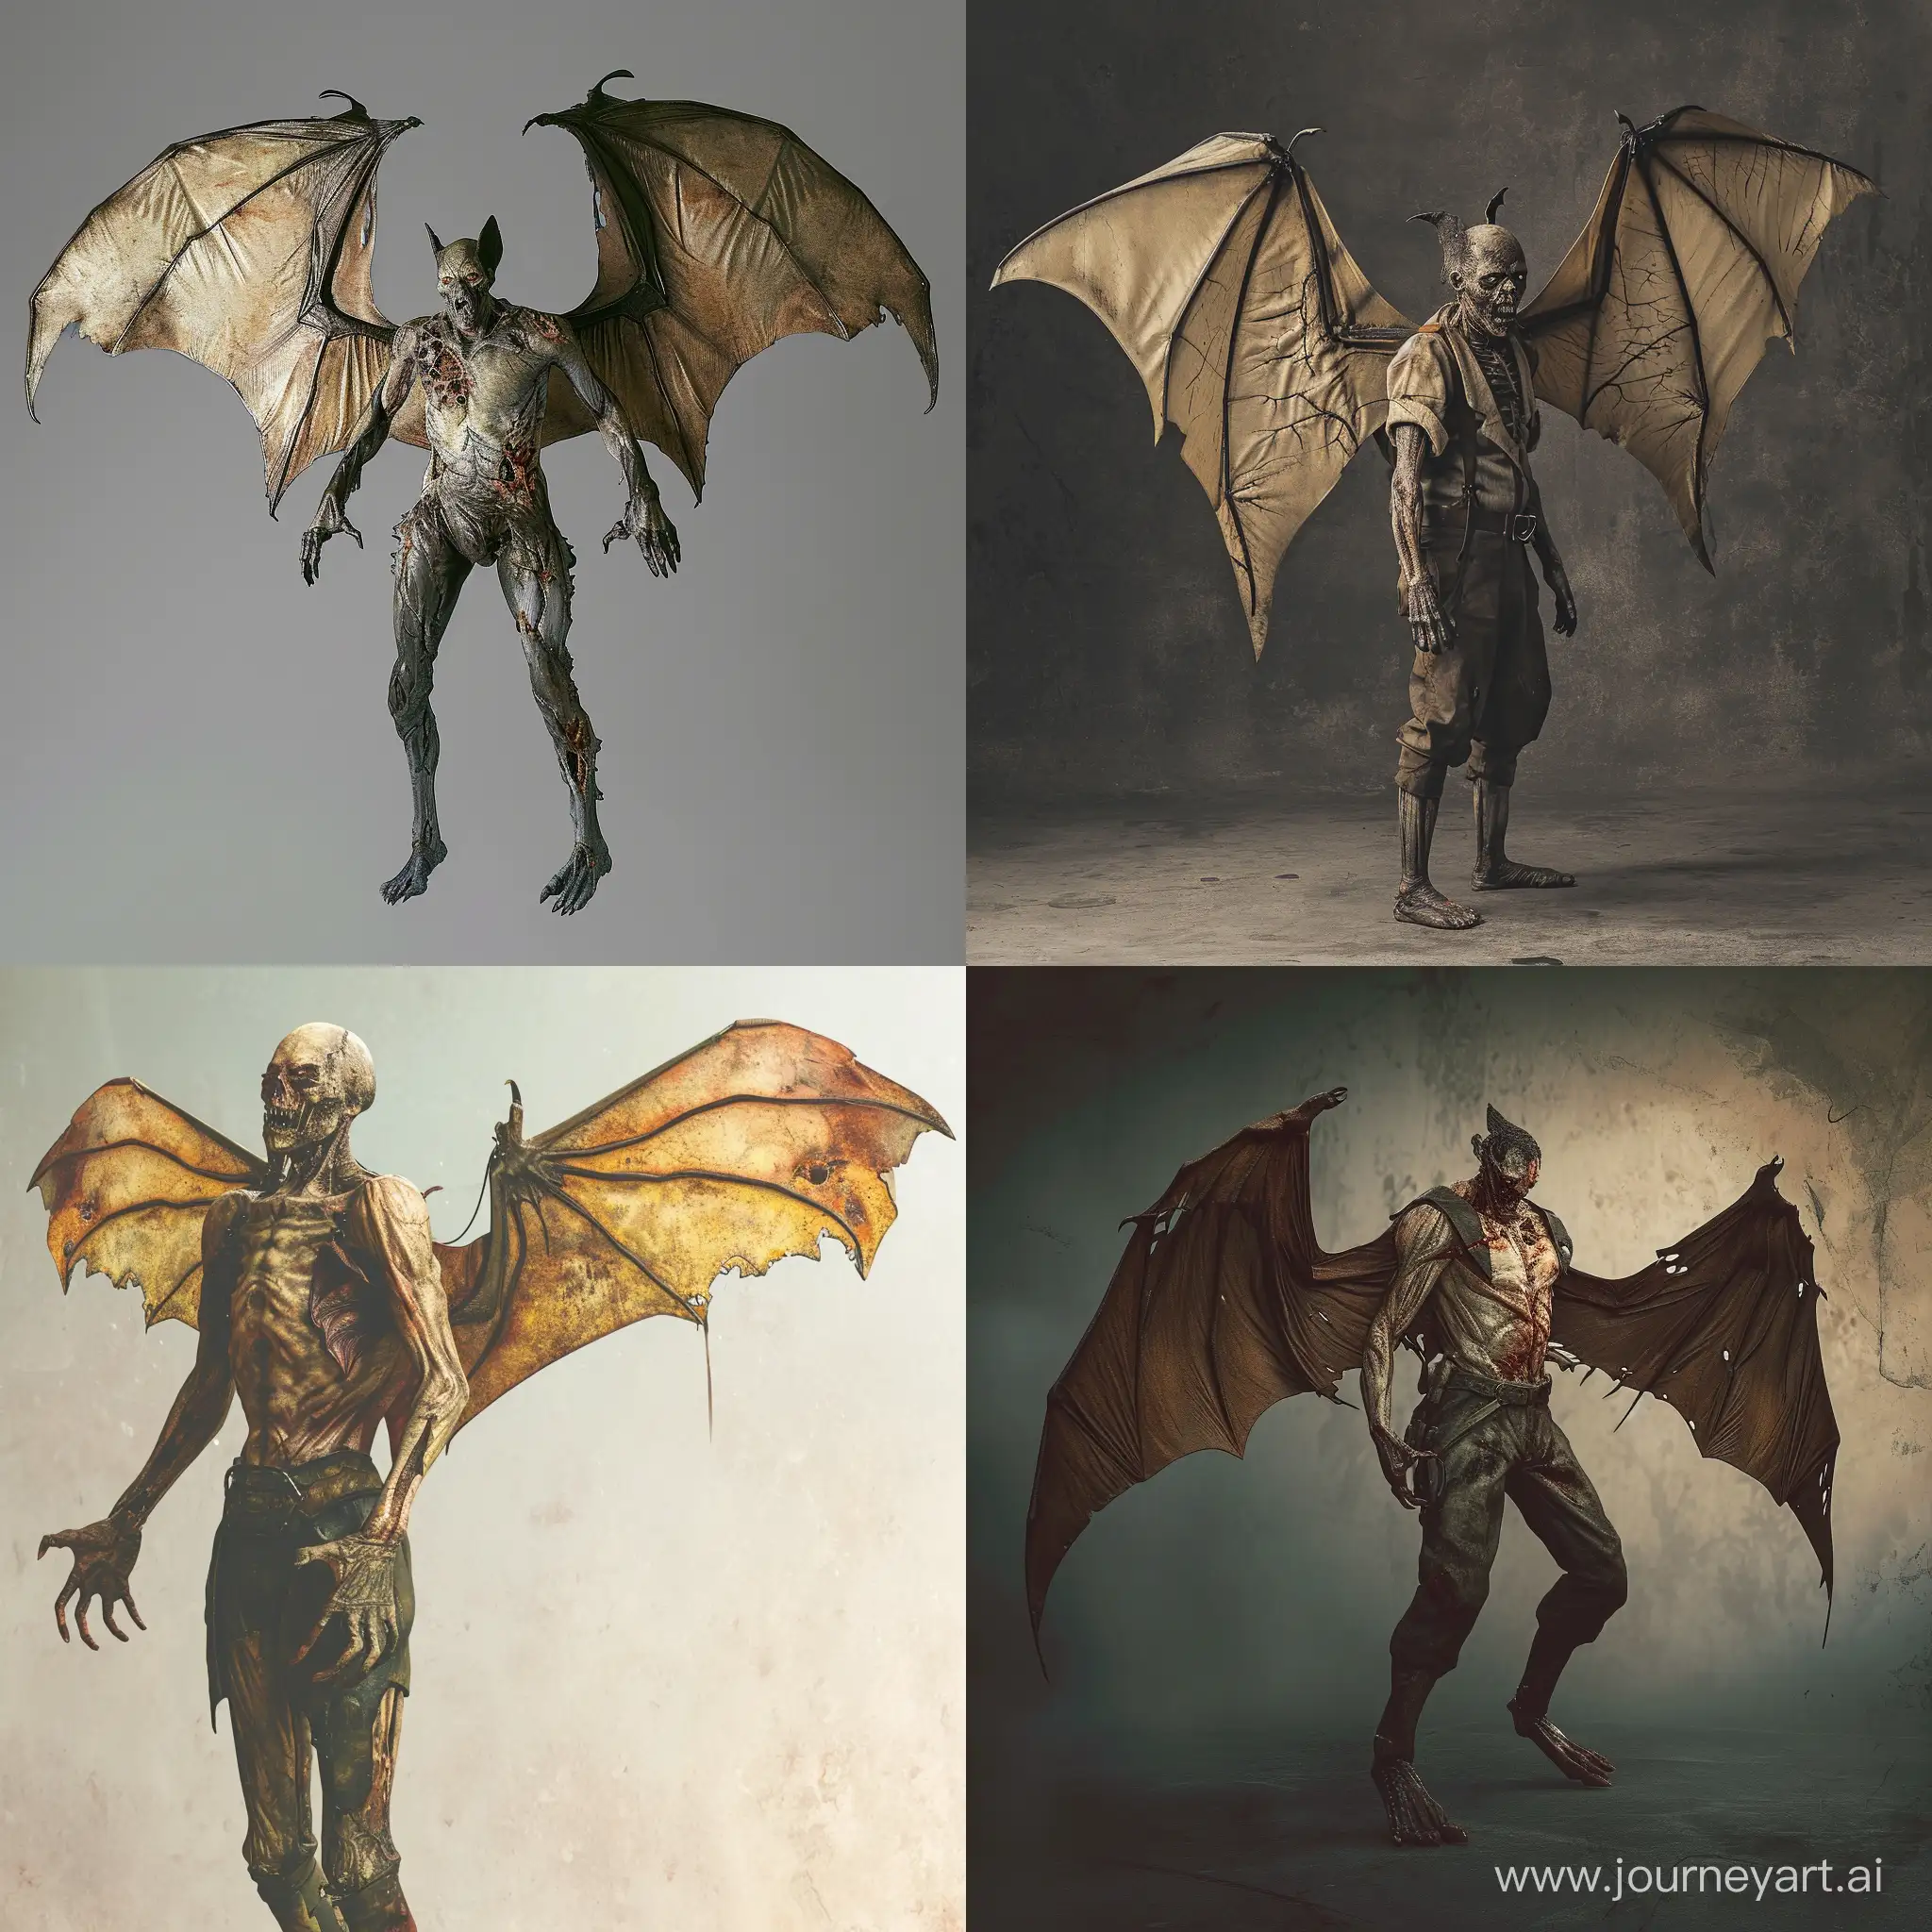 A zombie that descended from a human and a bat. The height of this flying creature is 190 cm. The wingspan is 10 meters. This mutant has wings behind its back.